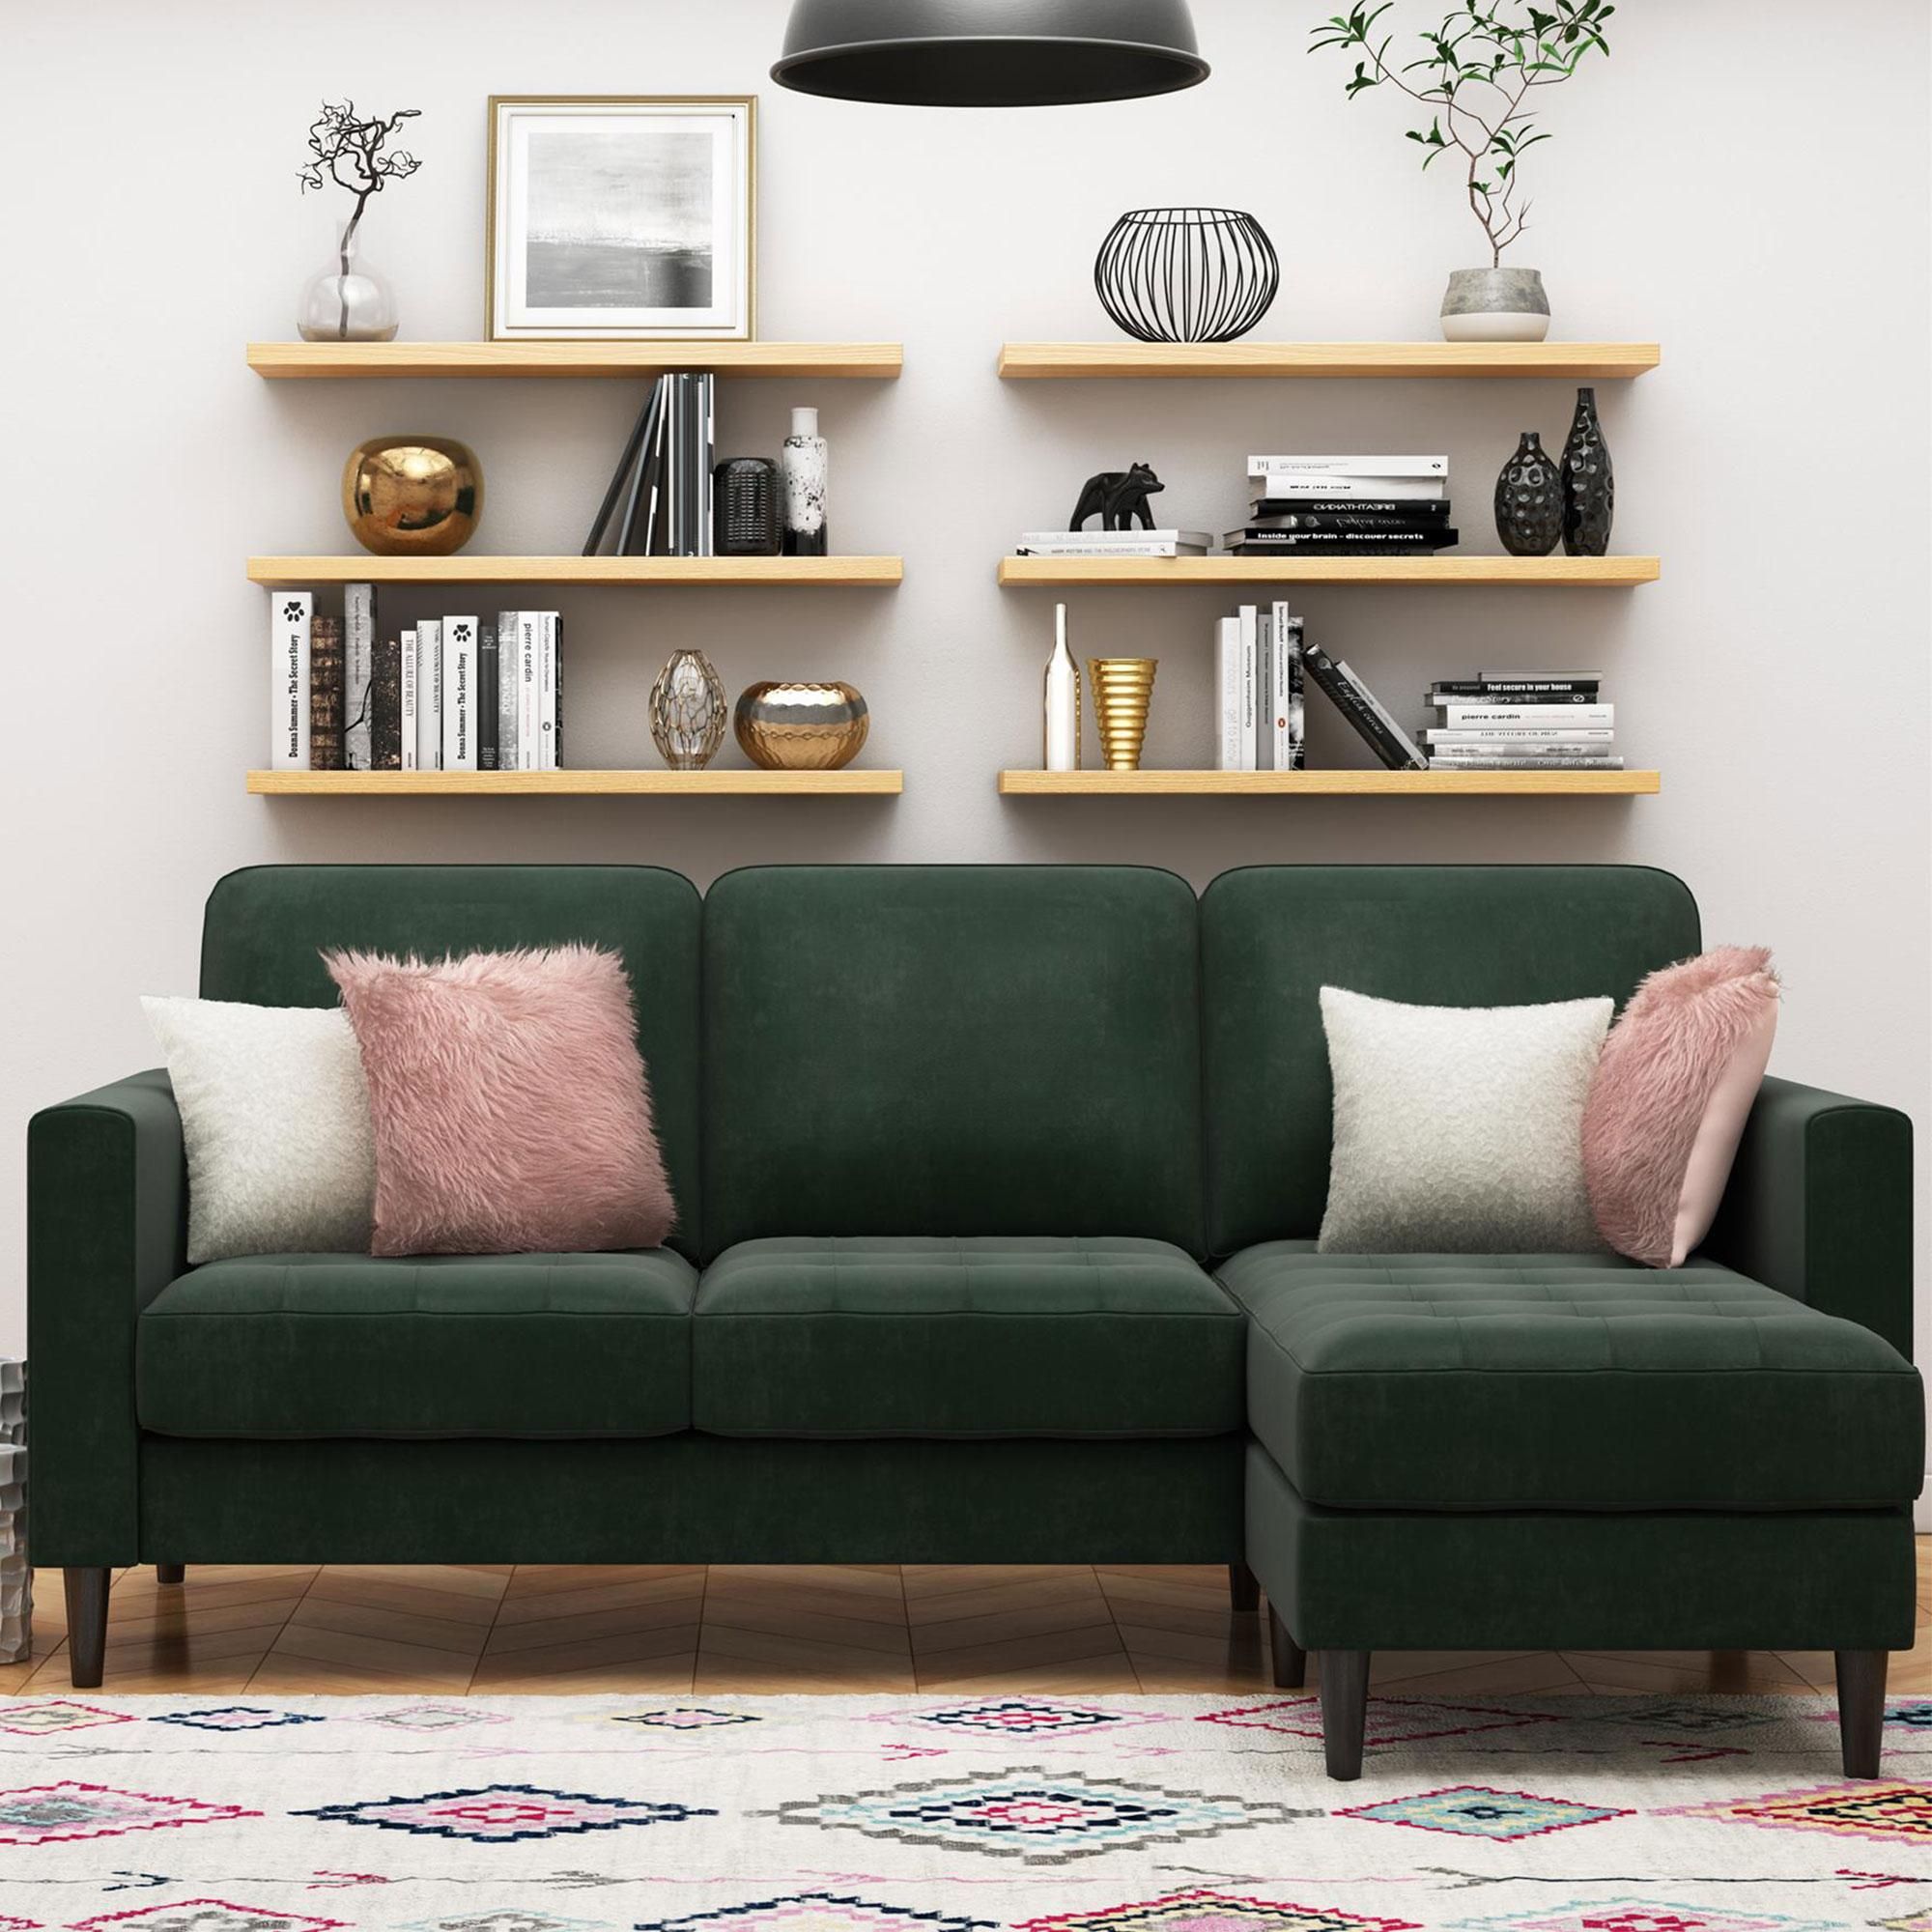 Dorel Asia Strummer 2 Piece Reversible Sectional Sofa With Chaise In Green  Velvet | Nfm Pertaining To Reversible Sectional Sofas (View 14 of 20)